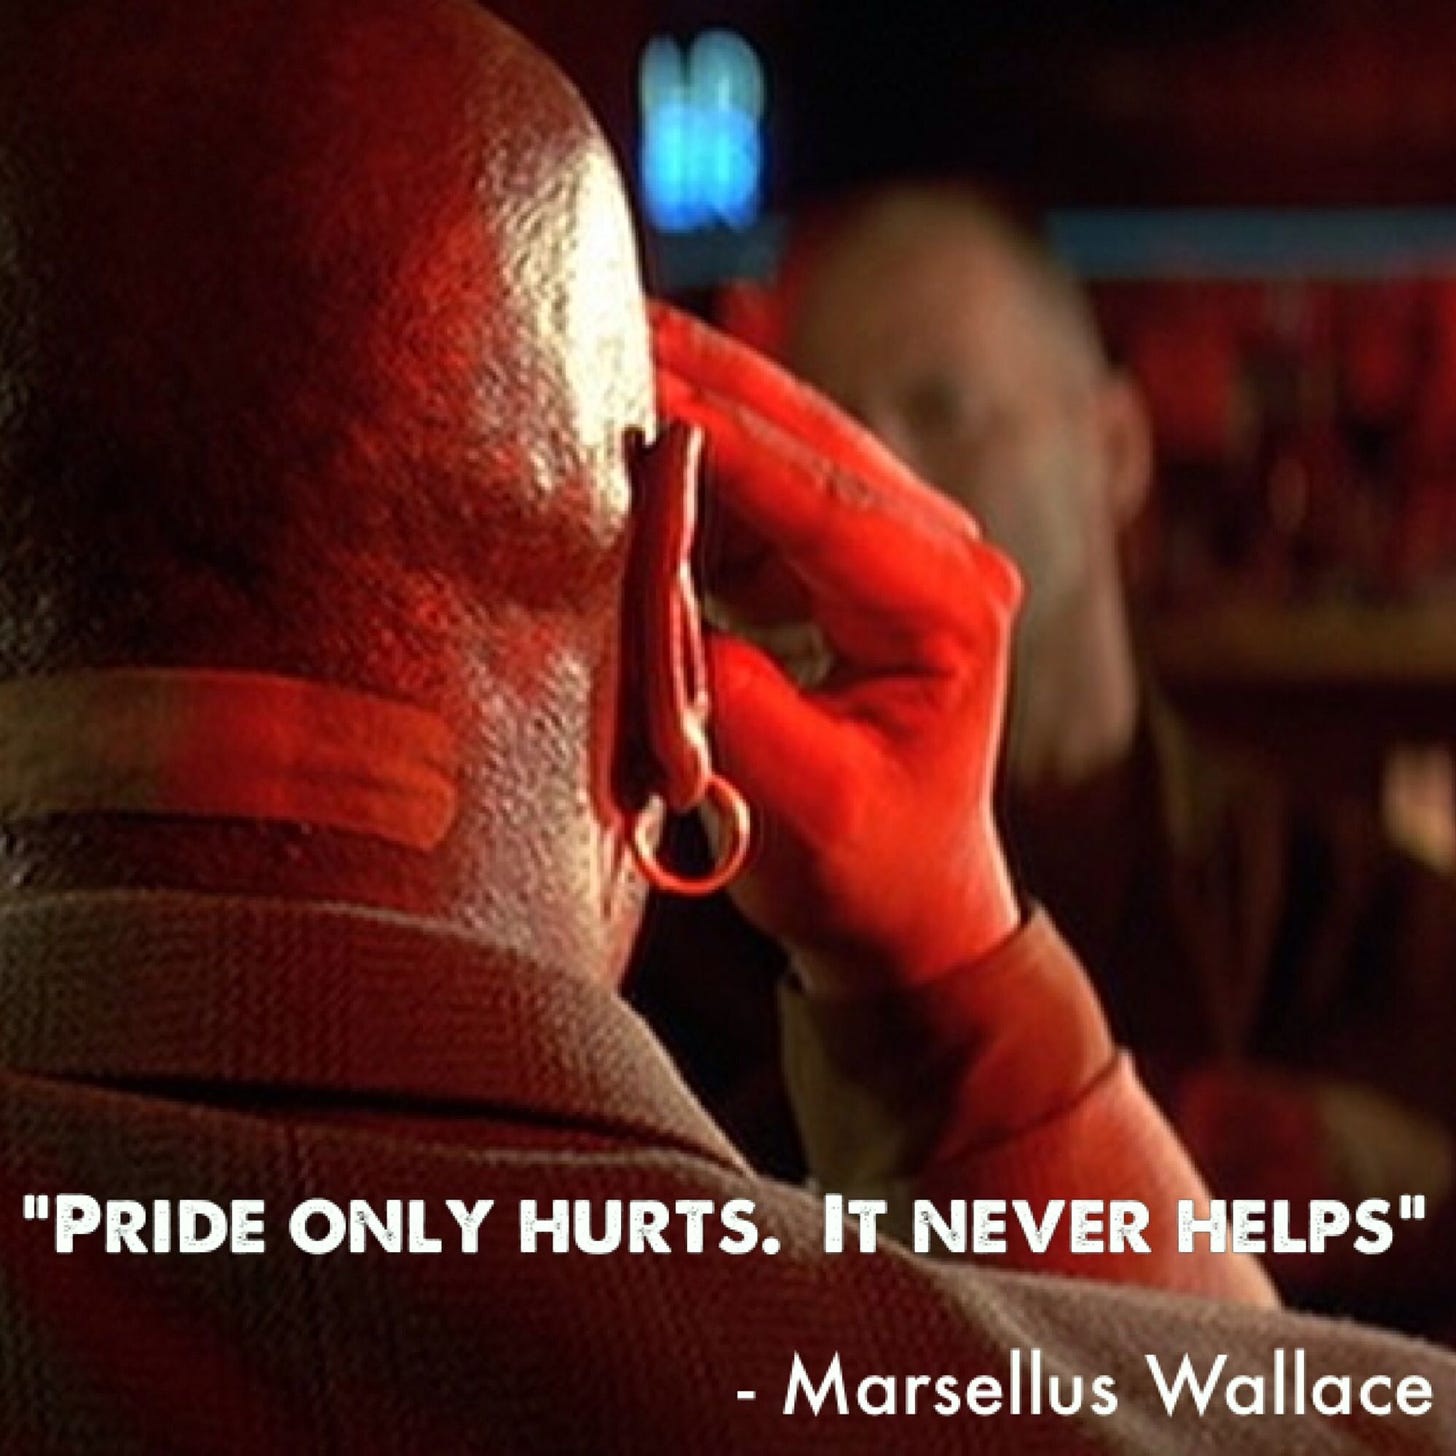 Pride only hurts. It never helps" Marsellus Wallace | Quote from #Pulp  Fiction #Quentin Tarantino | Fiction quotes, Pulp fiction quotes, Pulp  fiction